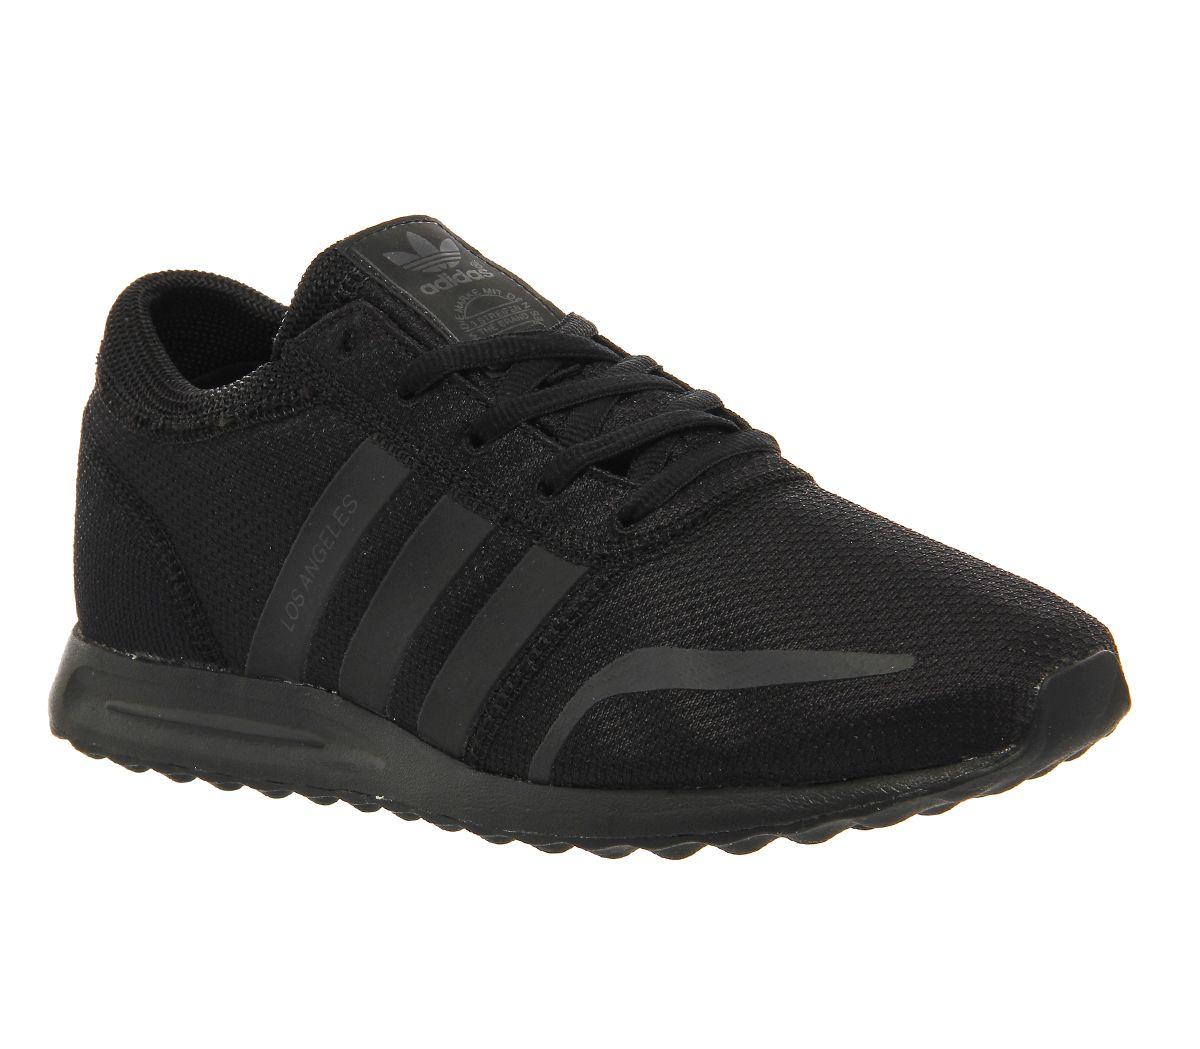 Adidas Los Angeles Trainers in Black | Lyst